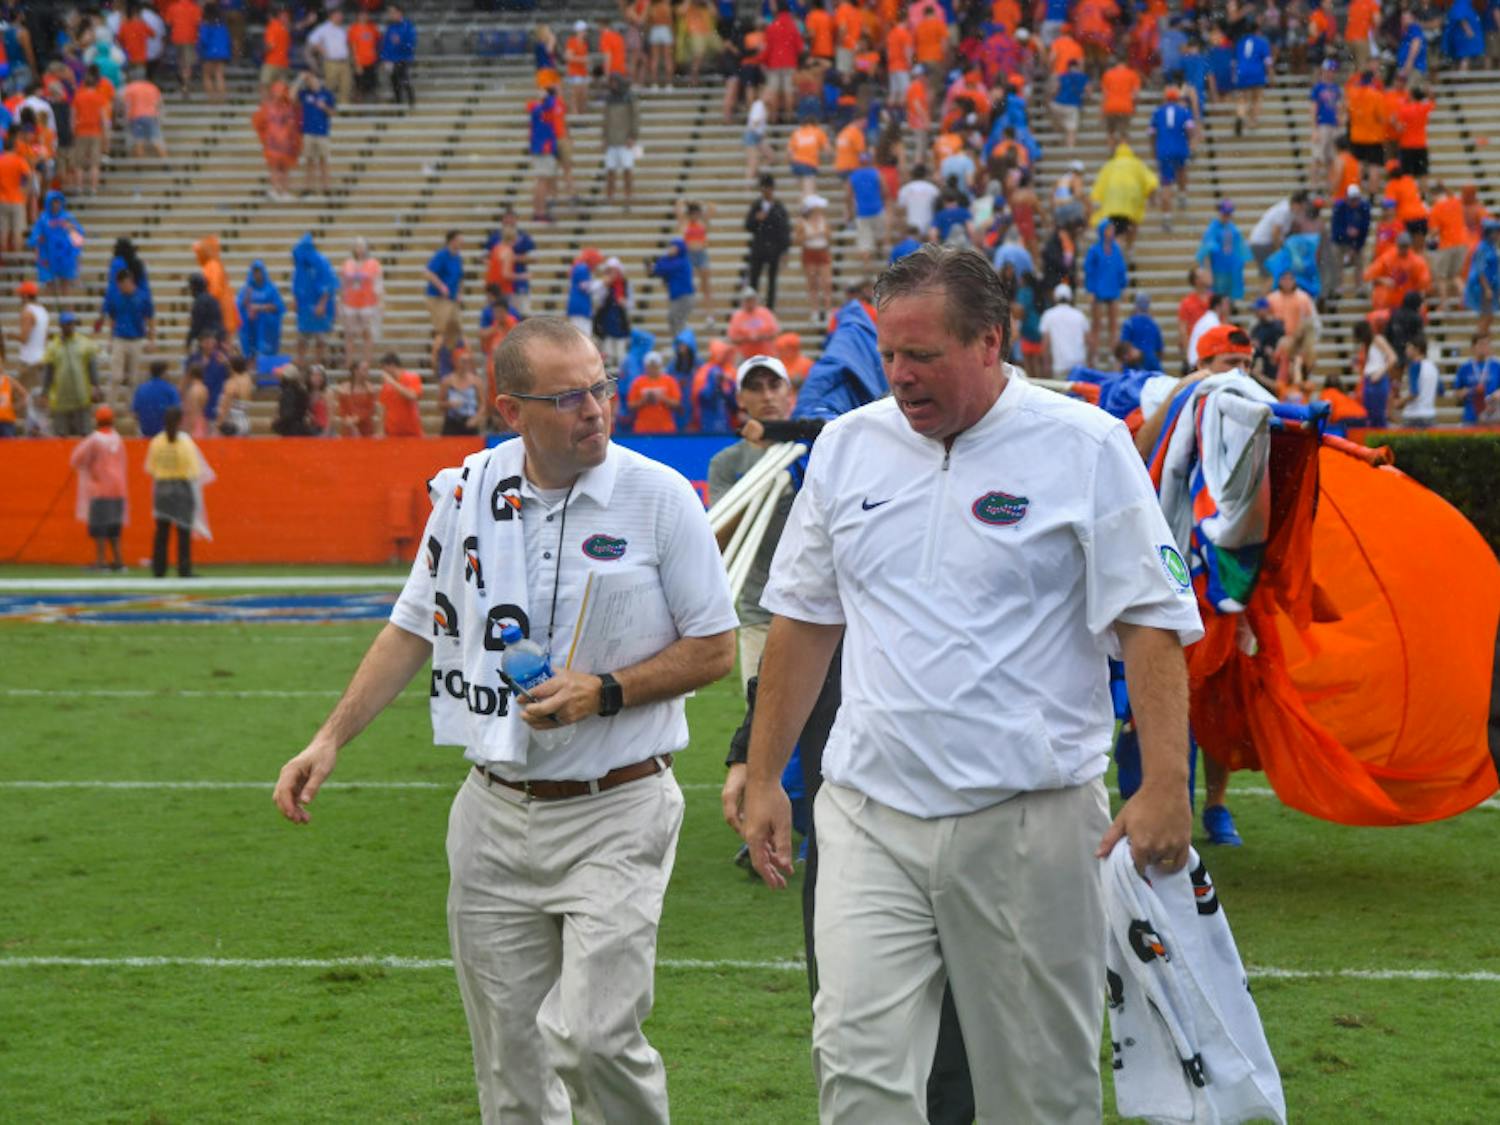 UF coach Jim McElwain and his staff don't appear to be tuned in to their players' social media accounts.